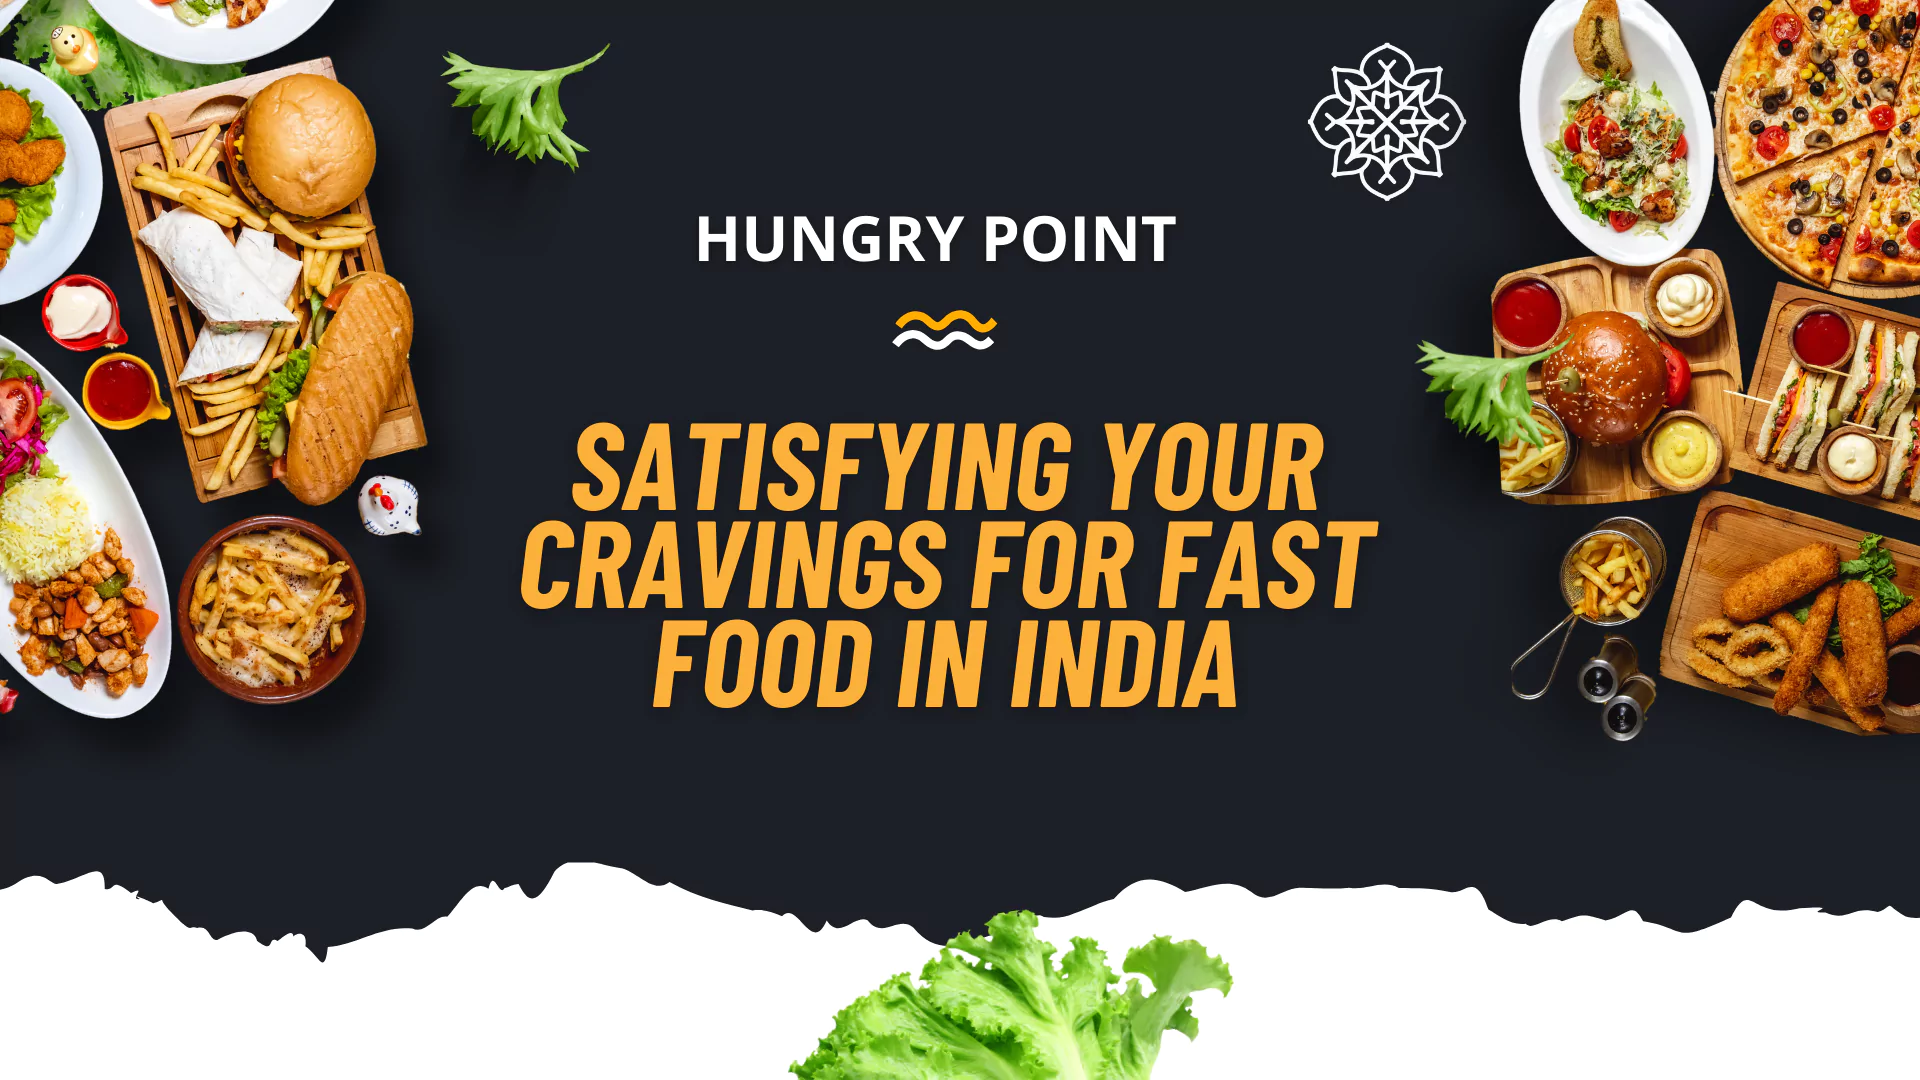 Hungry Point your destination for fast food cravings